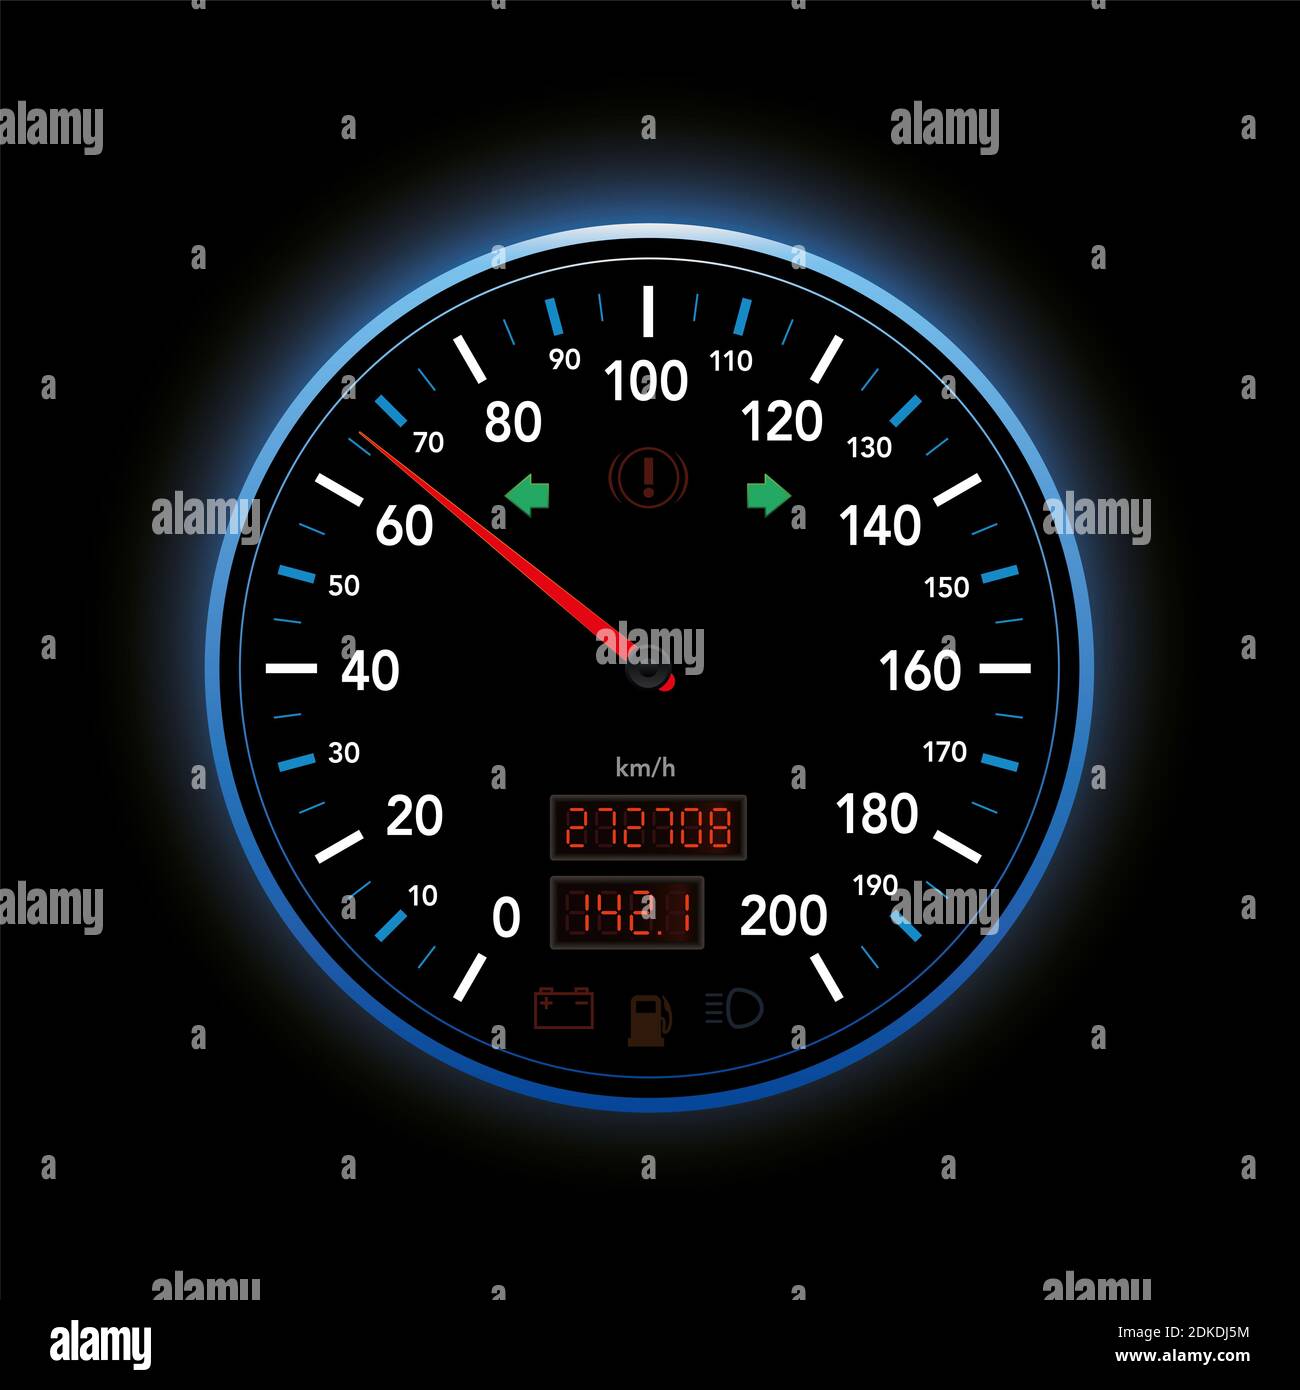 Speedometer, modern car display from zero to 200 kmh, with red pointer, digital mileage, turn signal indicator and warning lights. Stock Photo